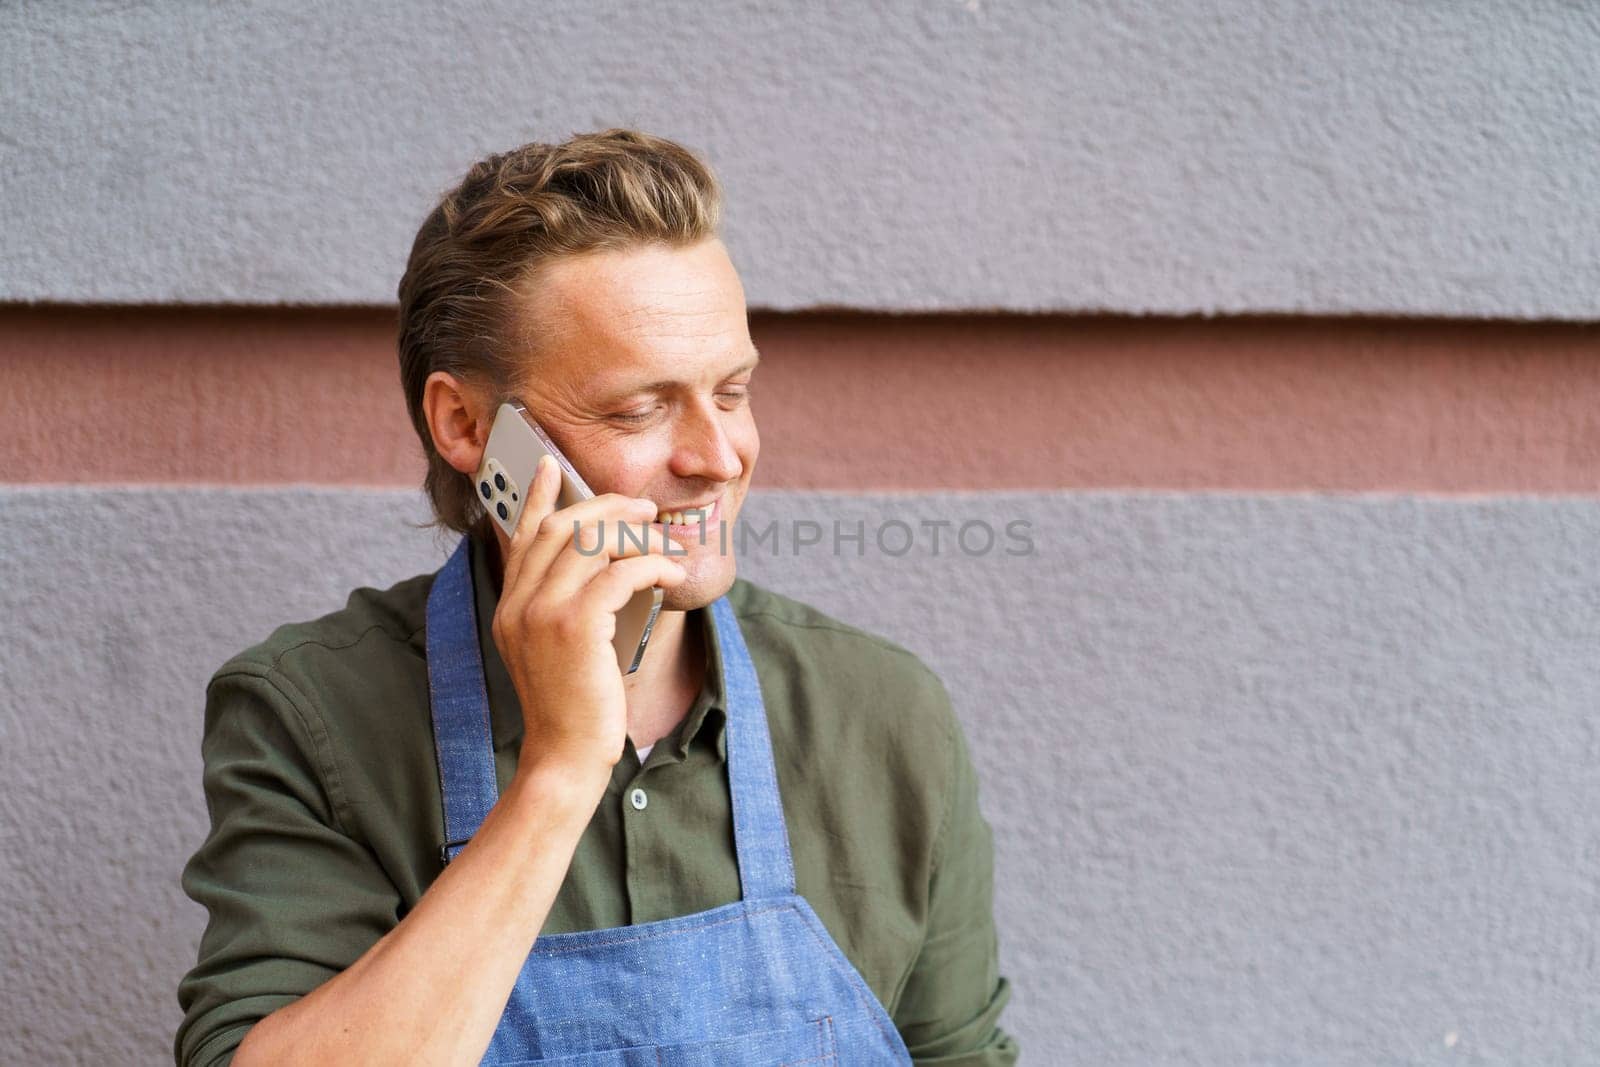 Restaurant worker receive call from client on mobile phone. With focus on communication and customer service, worker exemplifies dedication and multitasking abilities required in restaurant industry. . High quality photo